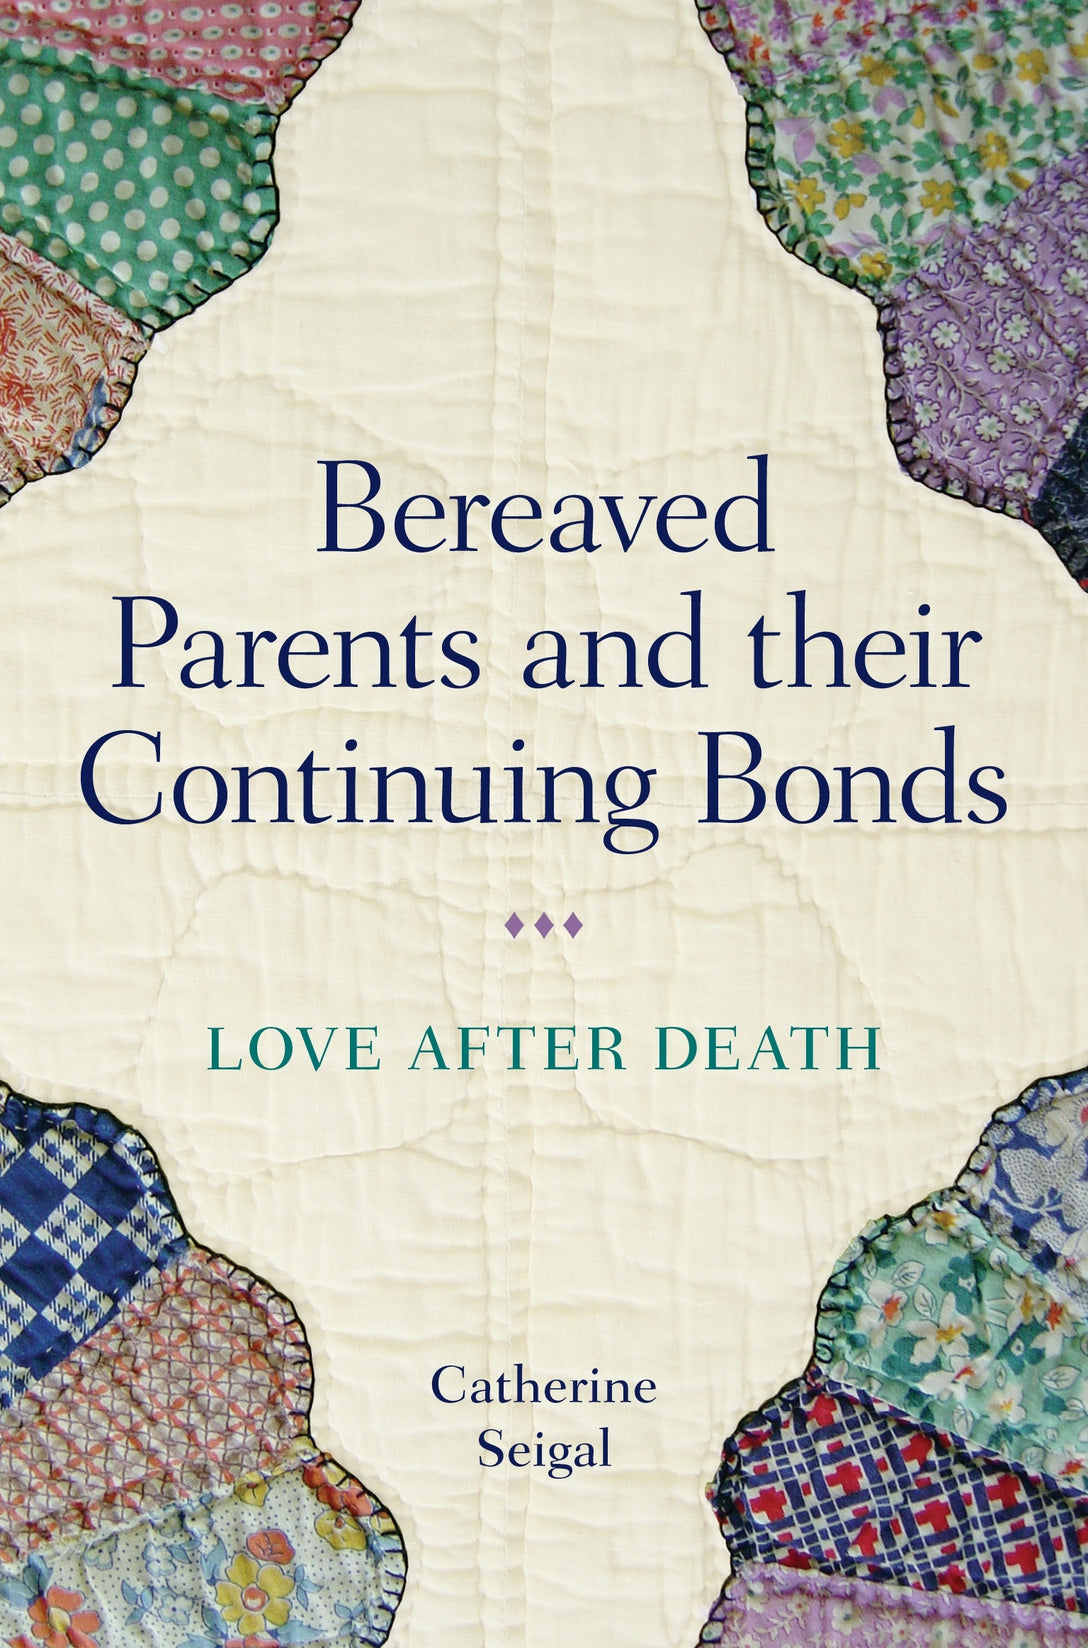 Bereaved Parents and their Continuing Bonds by Catherine Seigal